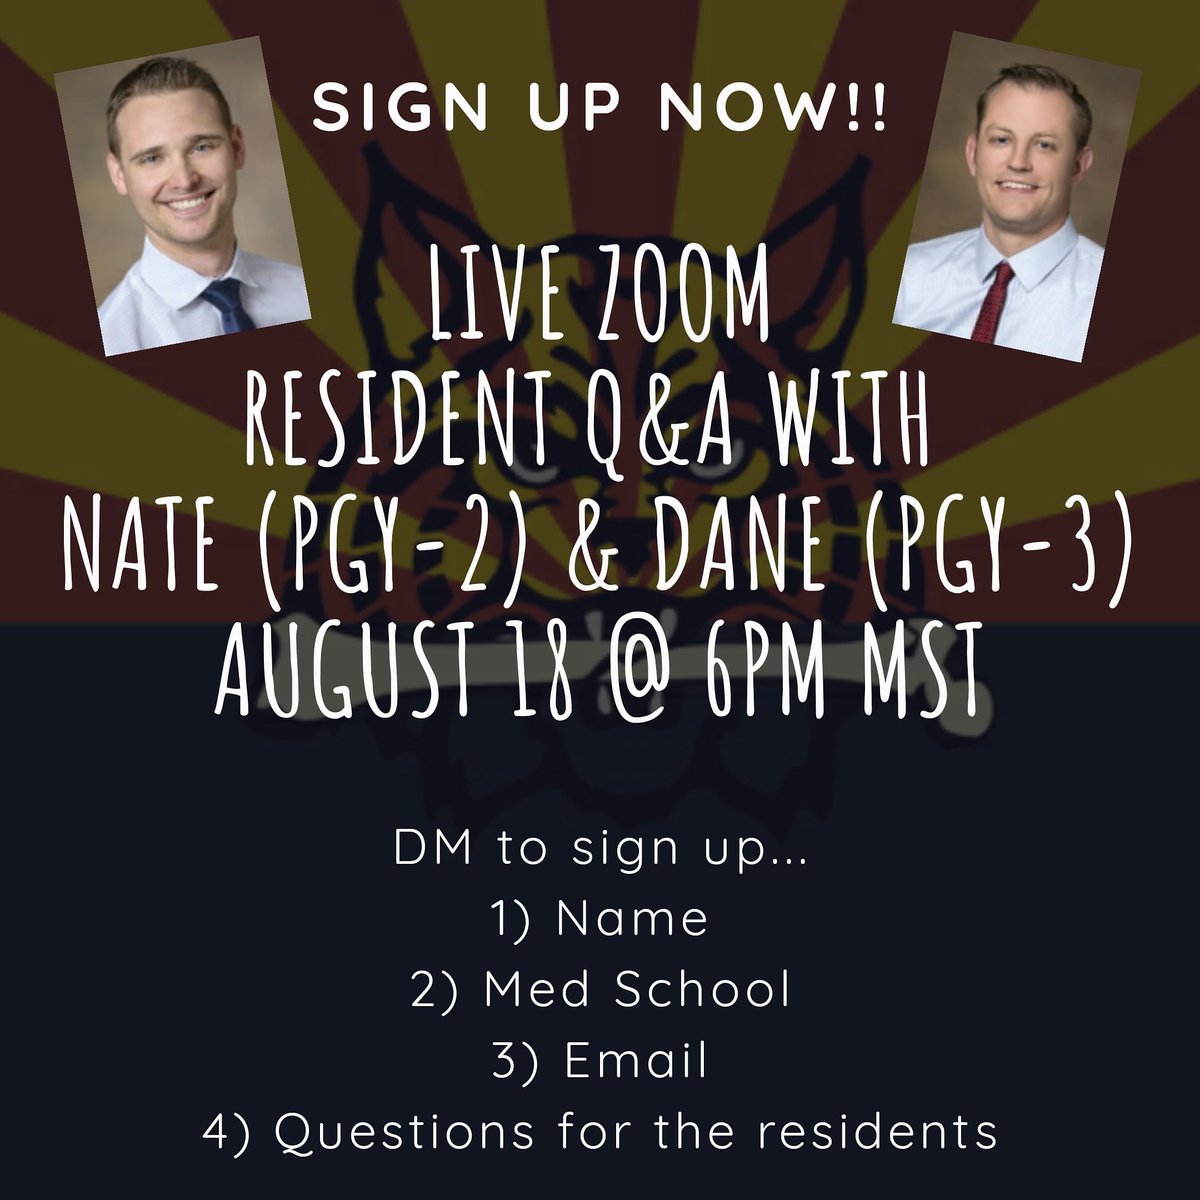 Join us for another Zoom Q&A with our residents on August 18th @ 6pm MST! DM your info to receive Zoom invite. Submit questions you would like answered...nothing is off limits...residency, living in Tucson, hobbies/interest, family life, etc. 
#orthomatch2021 #orthoresidency